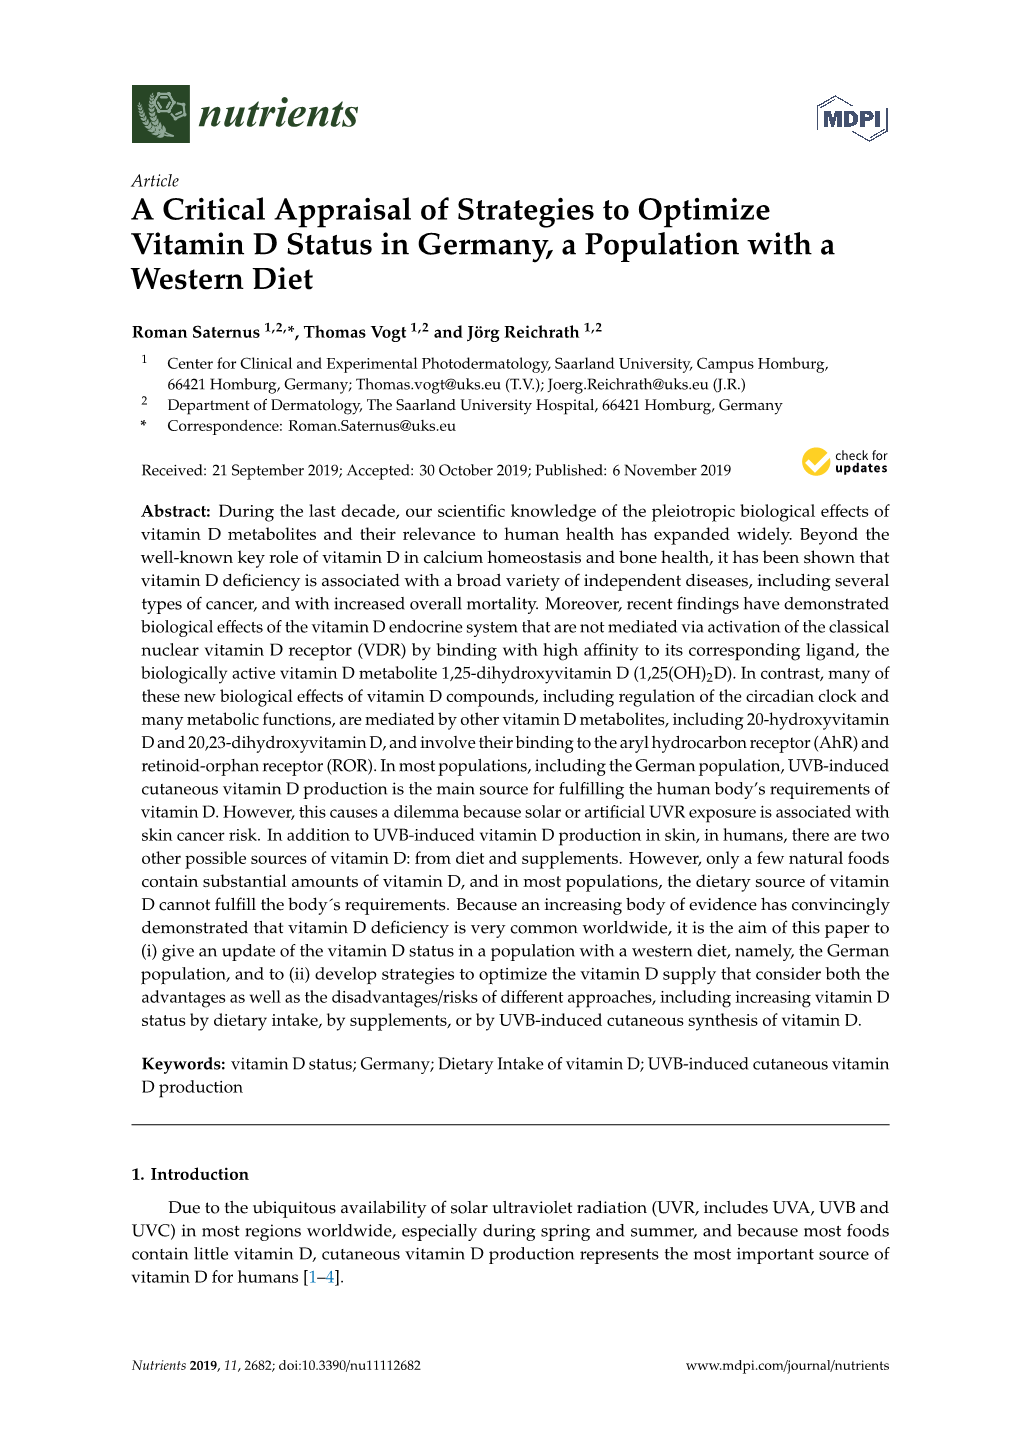 A Critical Appraisal of Strategies to Optimize Vitamin D Status in Germany, a Population with a Western Diet